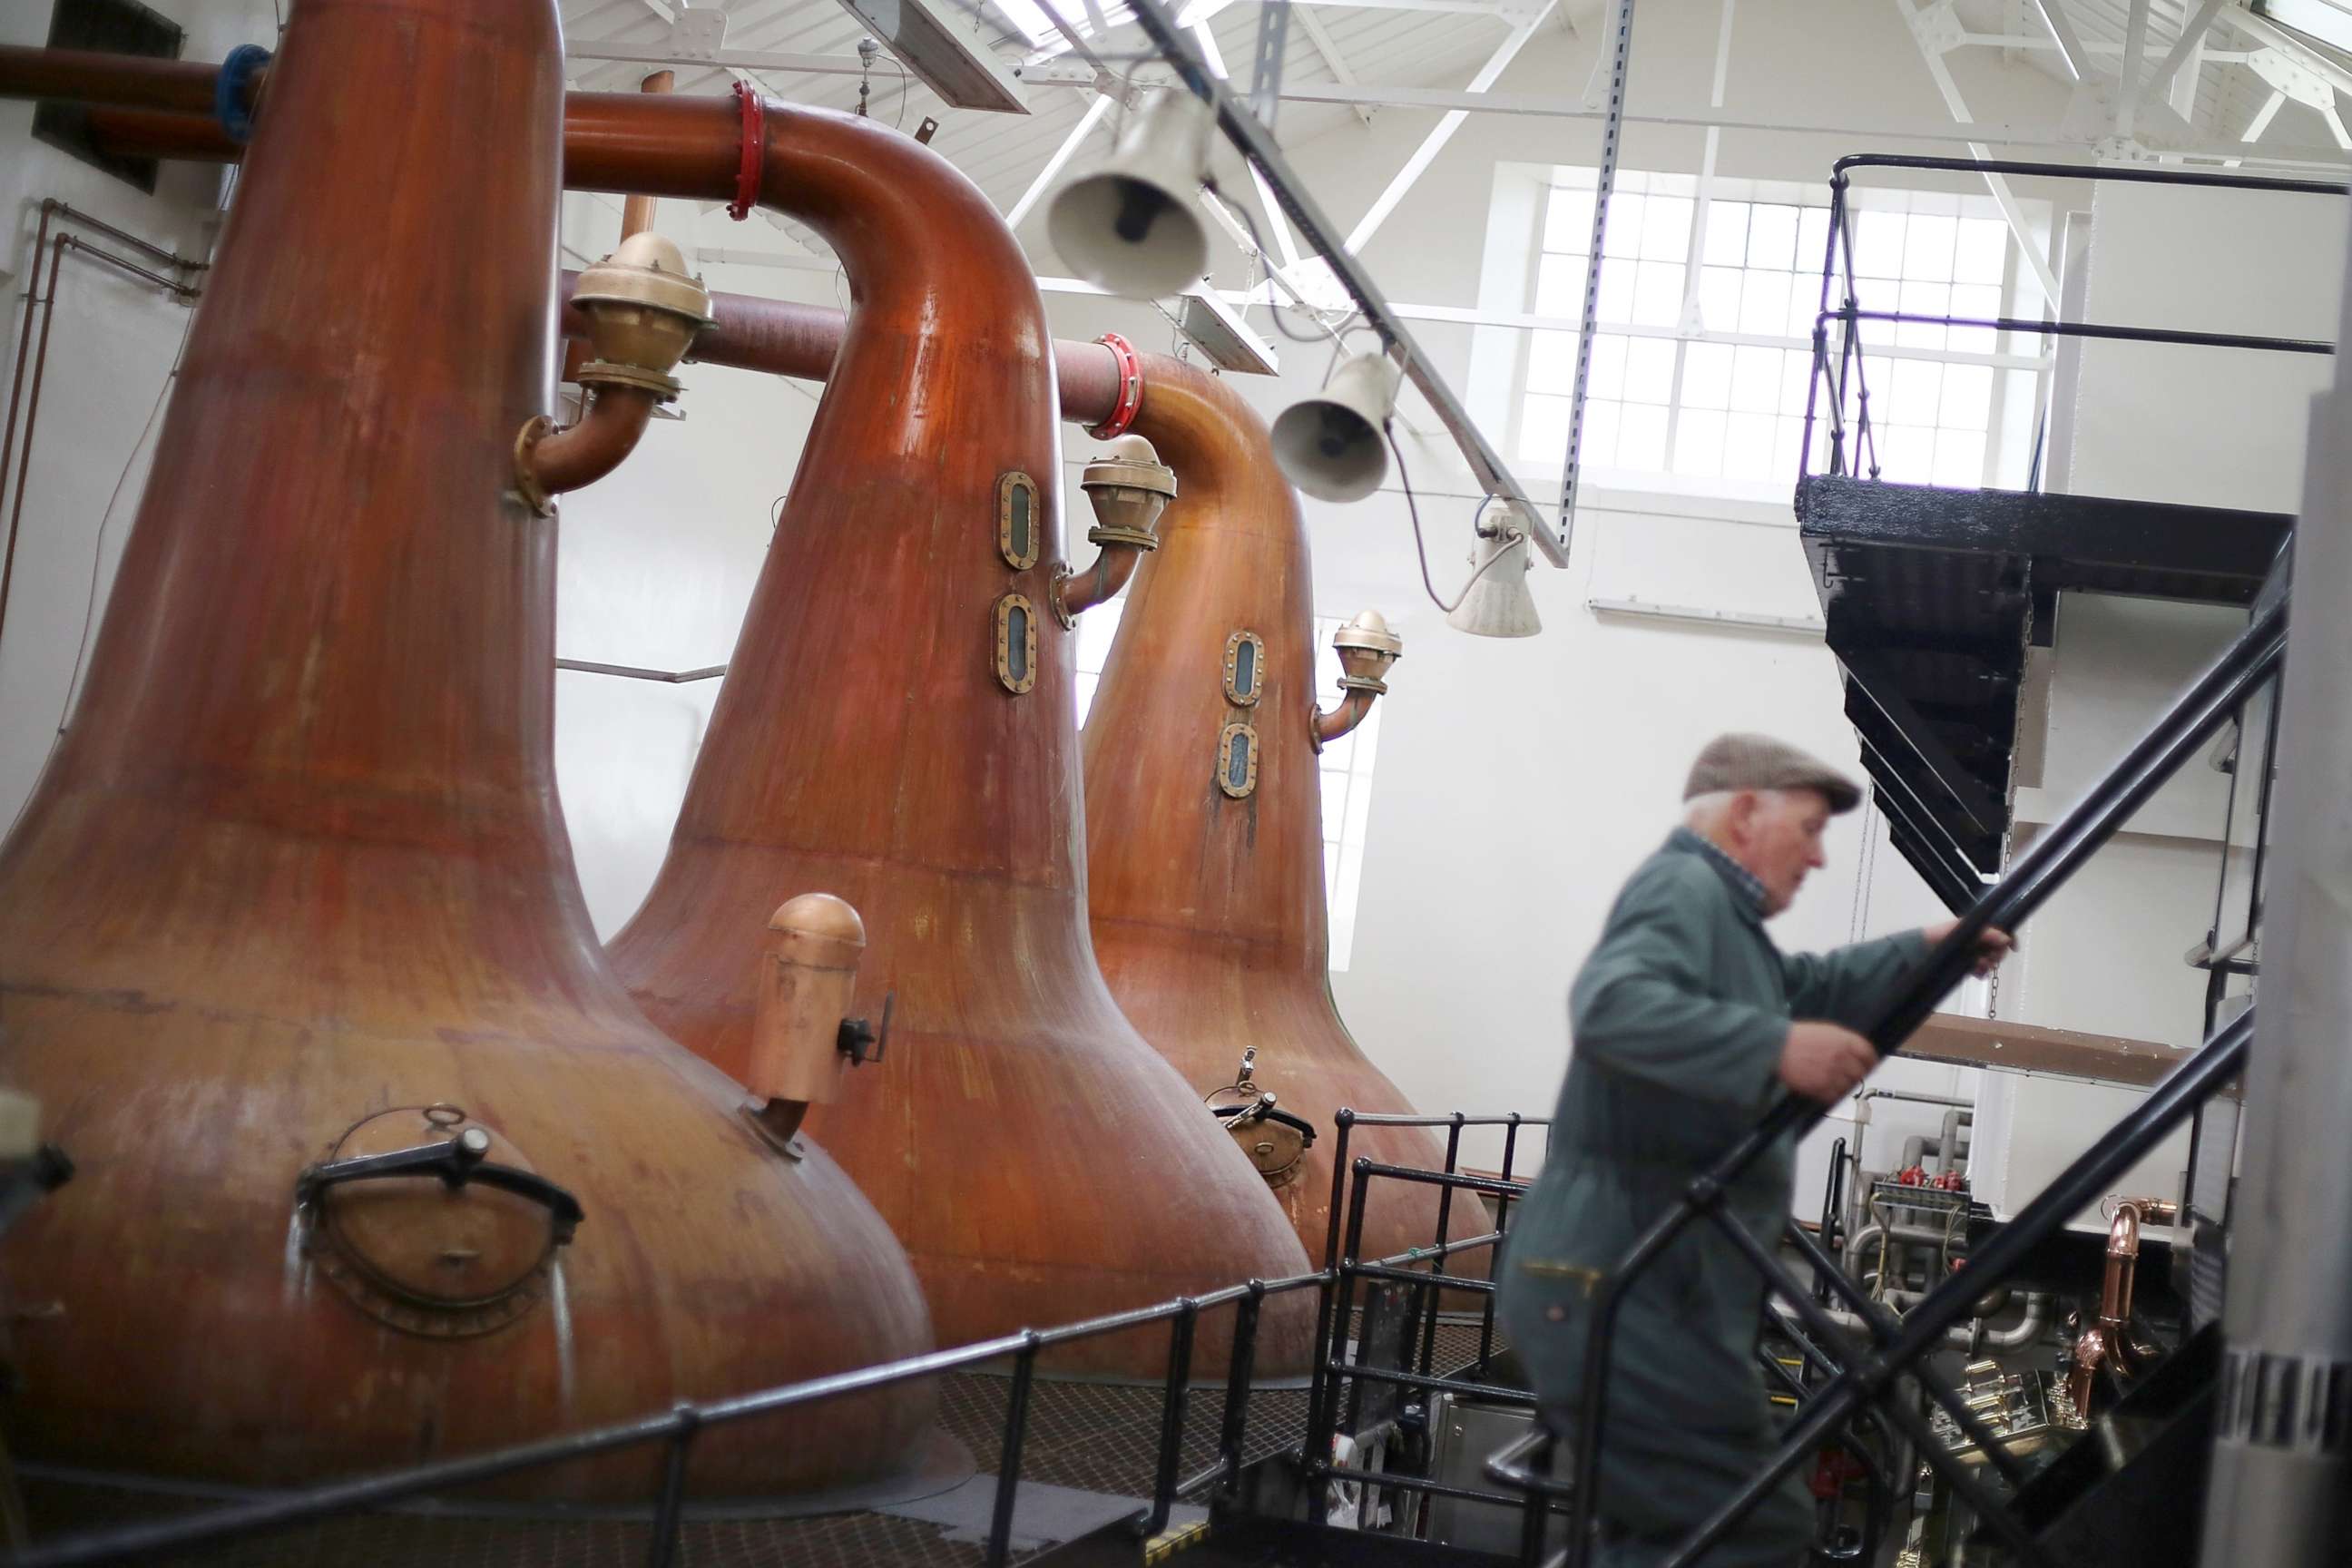 PHOTO: In this file photo, Dave Reid in the 'still room', where the spirit is distilled, of Highland Park whisky distillery, the most northerly distillery in Scotland, May 30, 2014 in Kirkwall, Scotland.